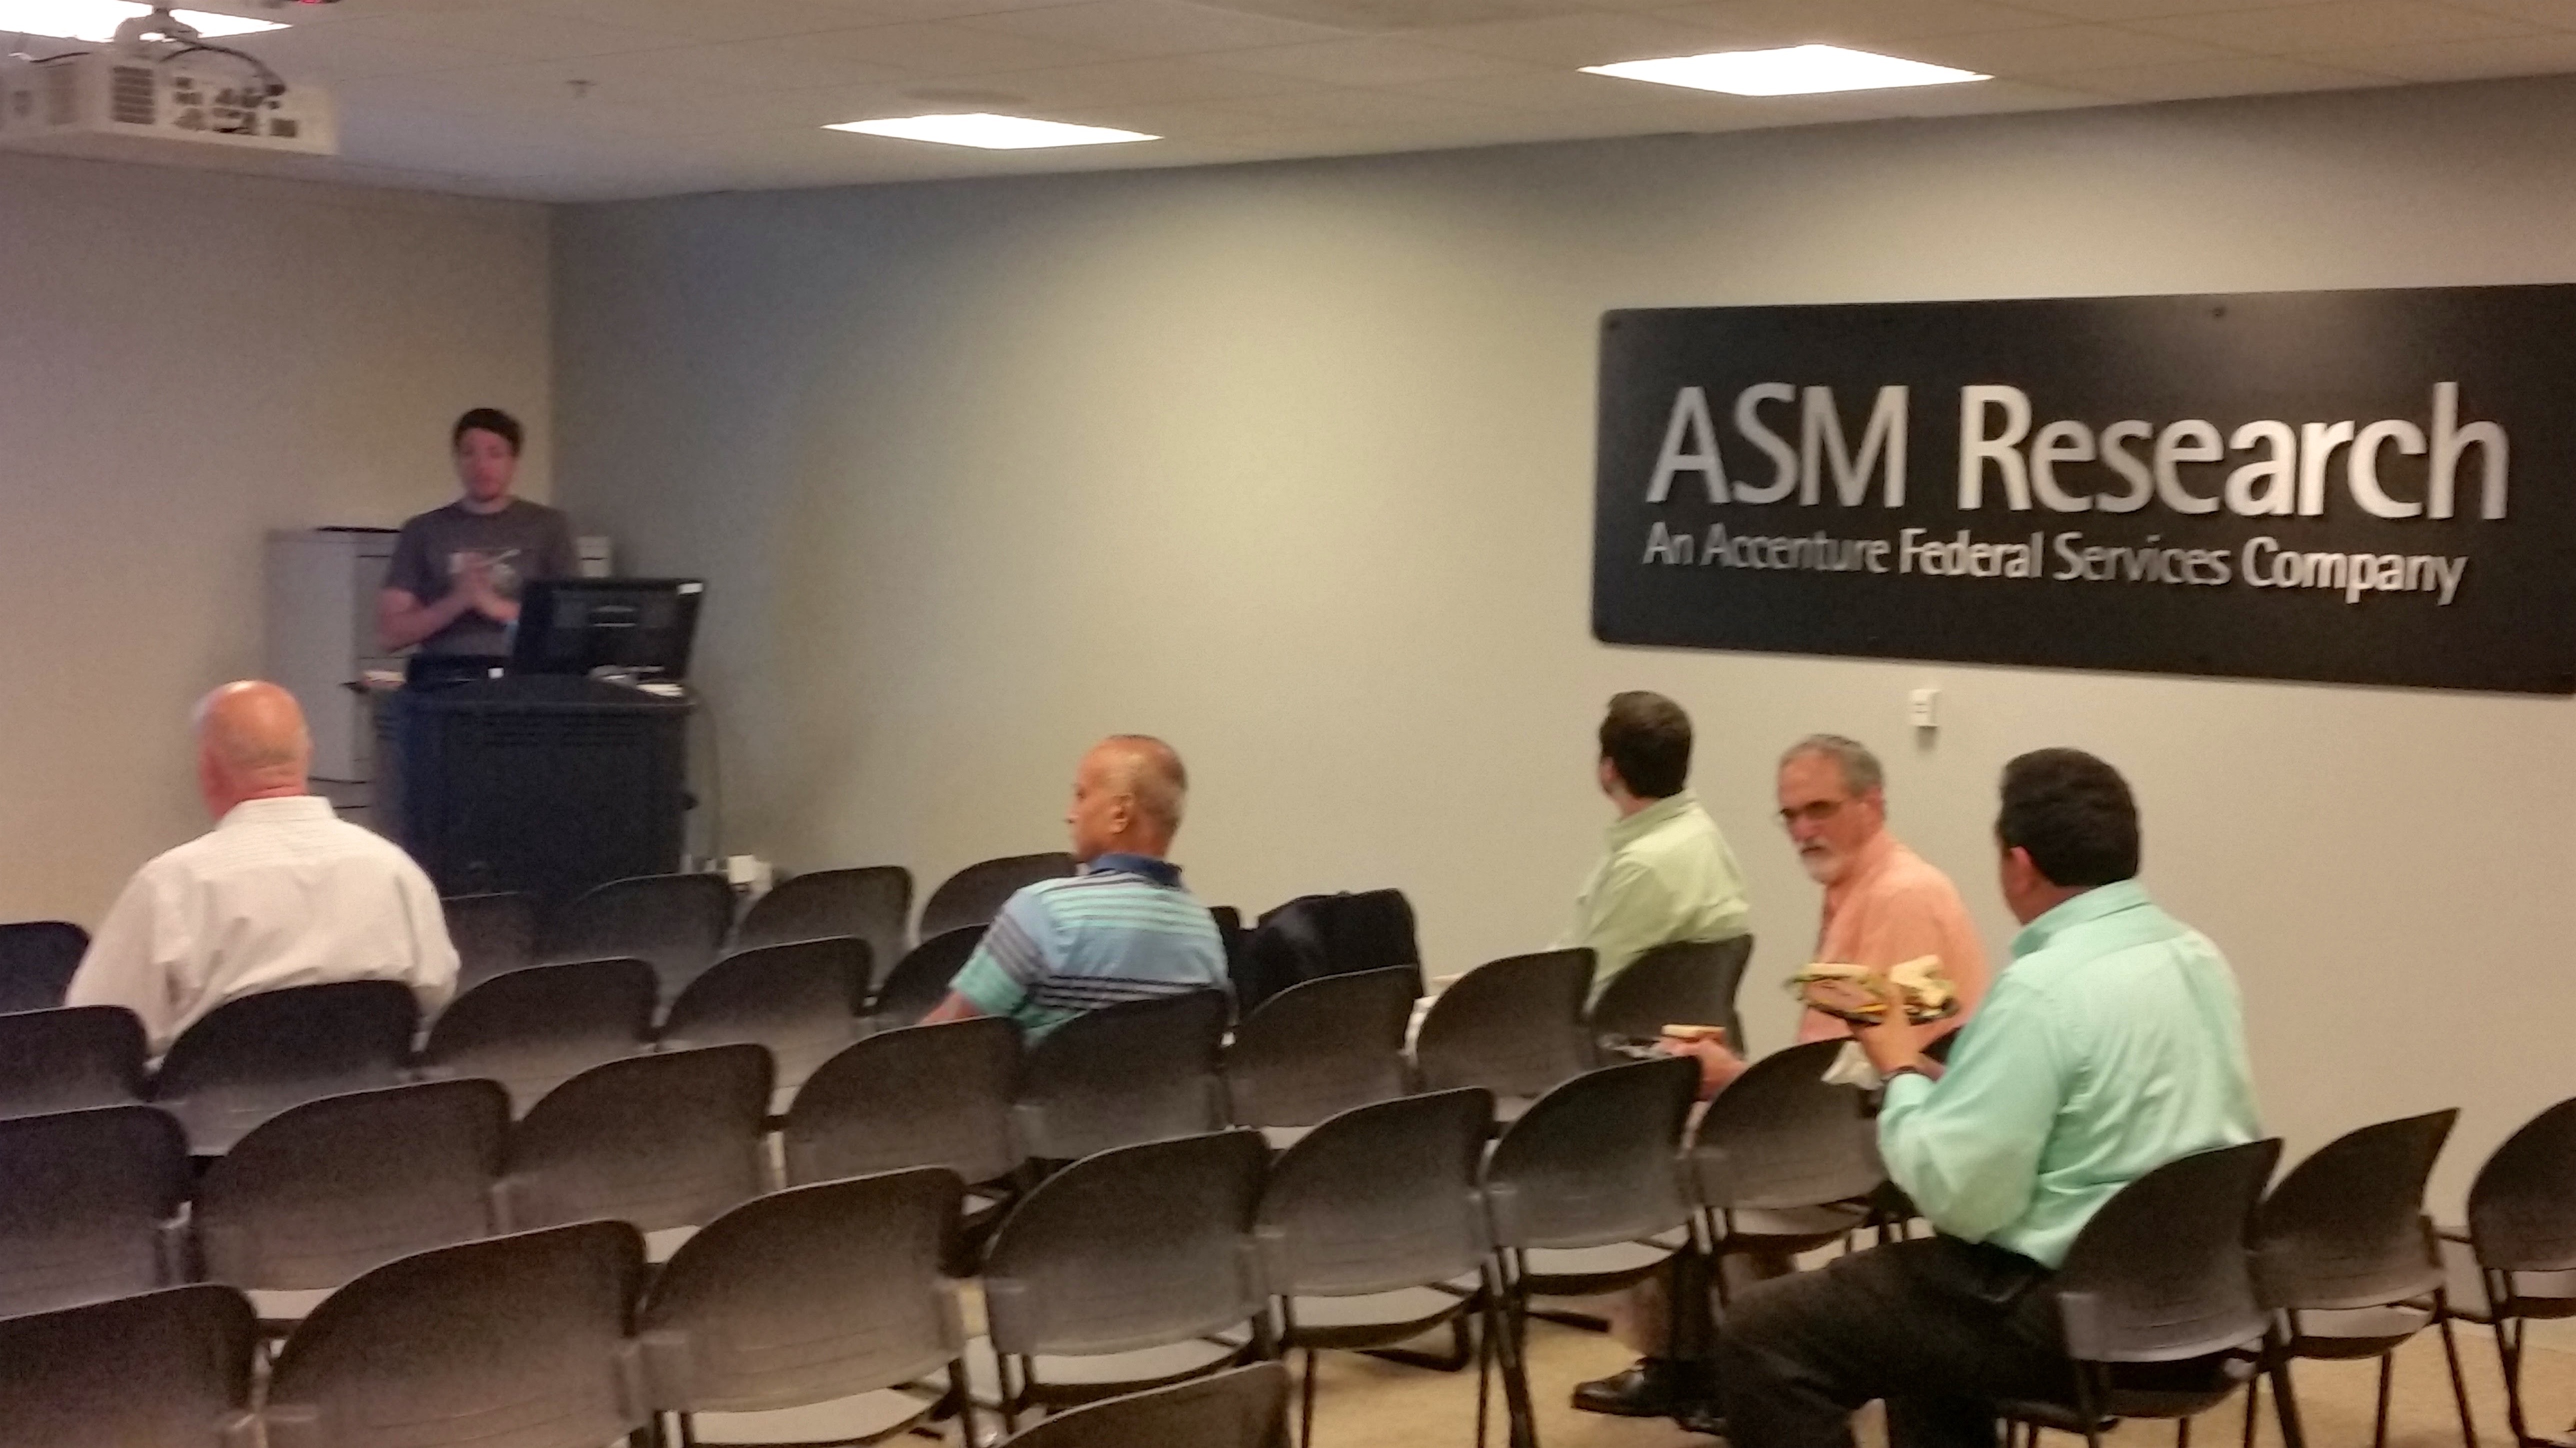 At the August 2016 CMWG meeting: Thanks to ASM Research for hosting our CM Working Group meeting!